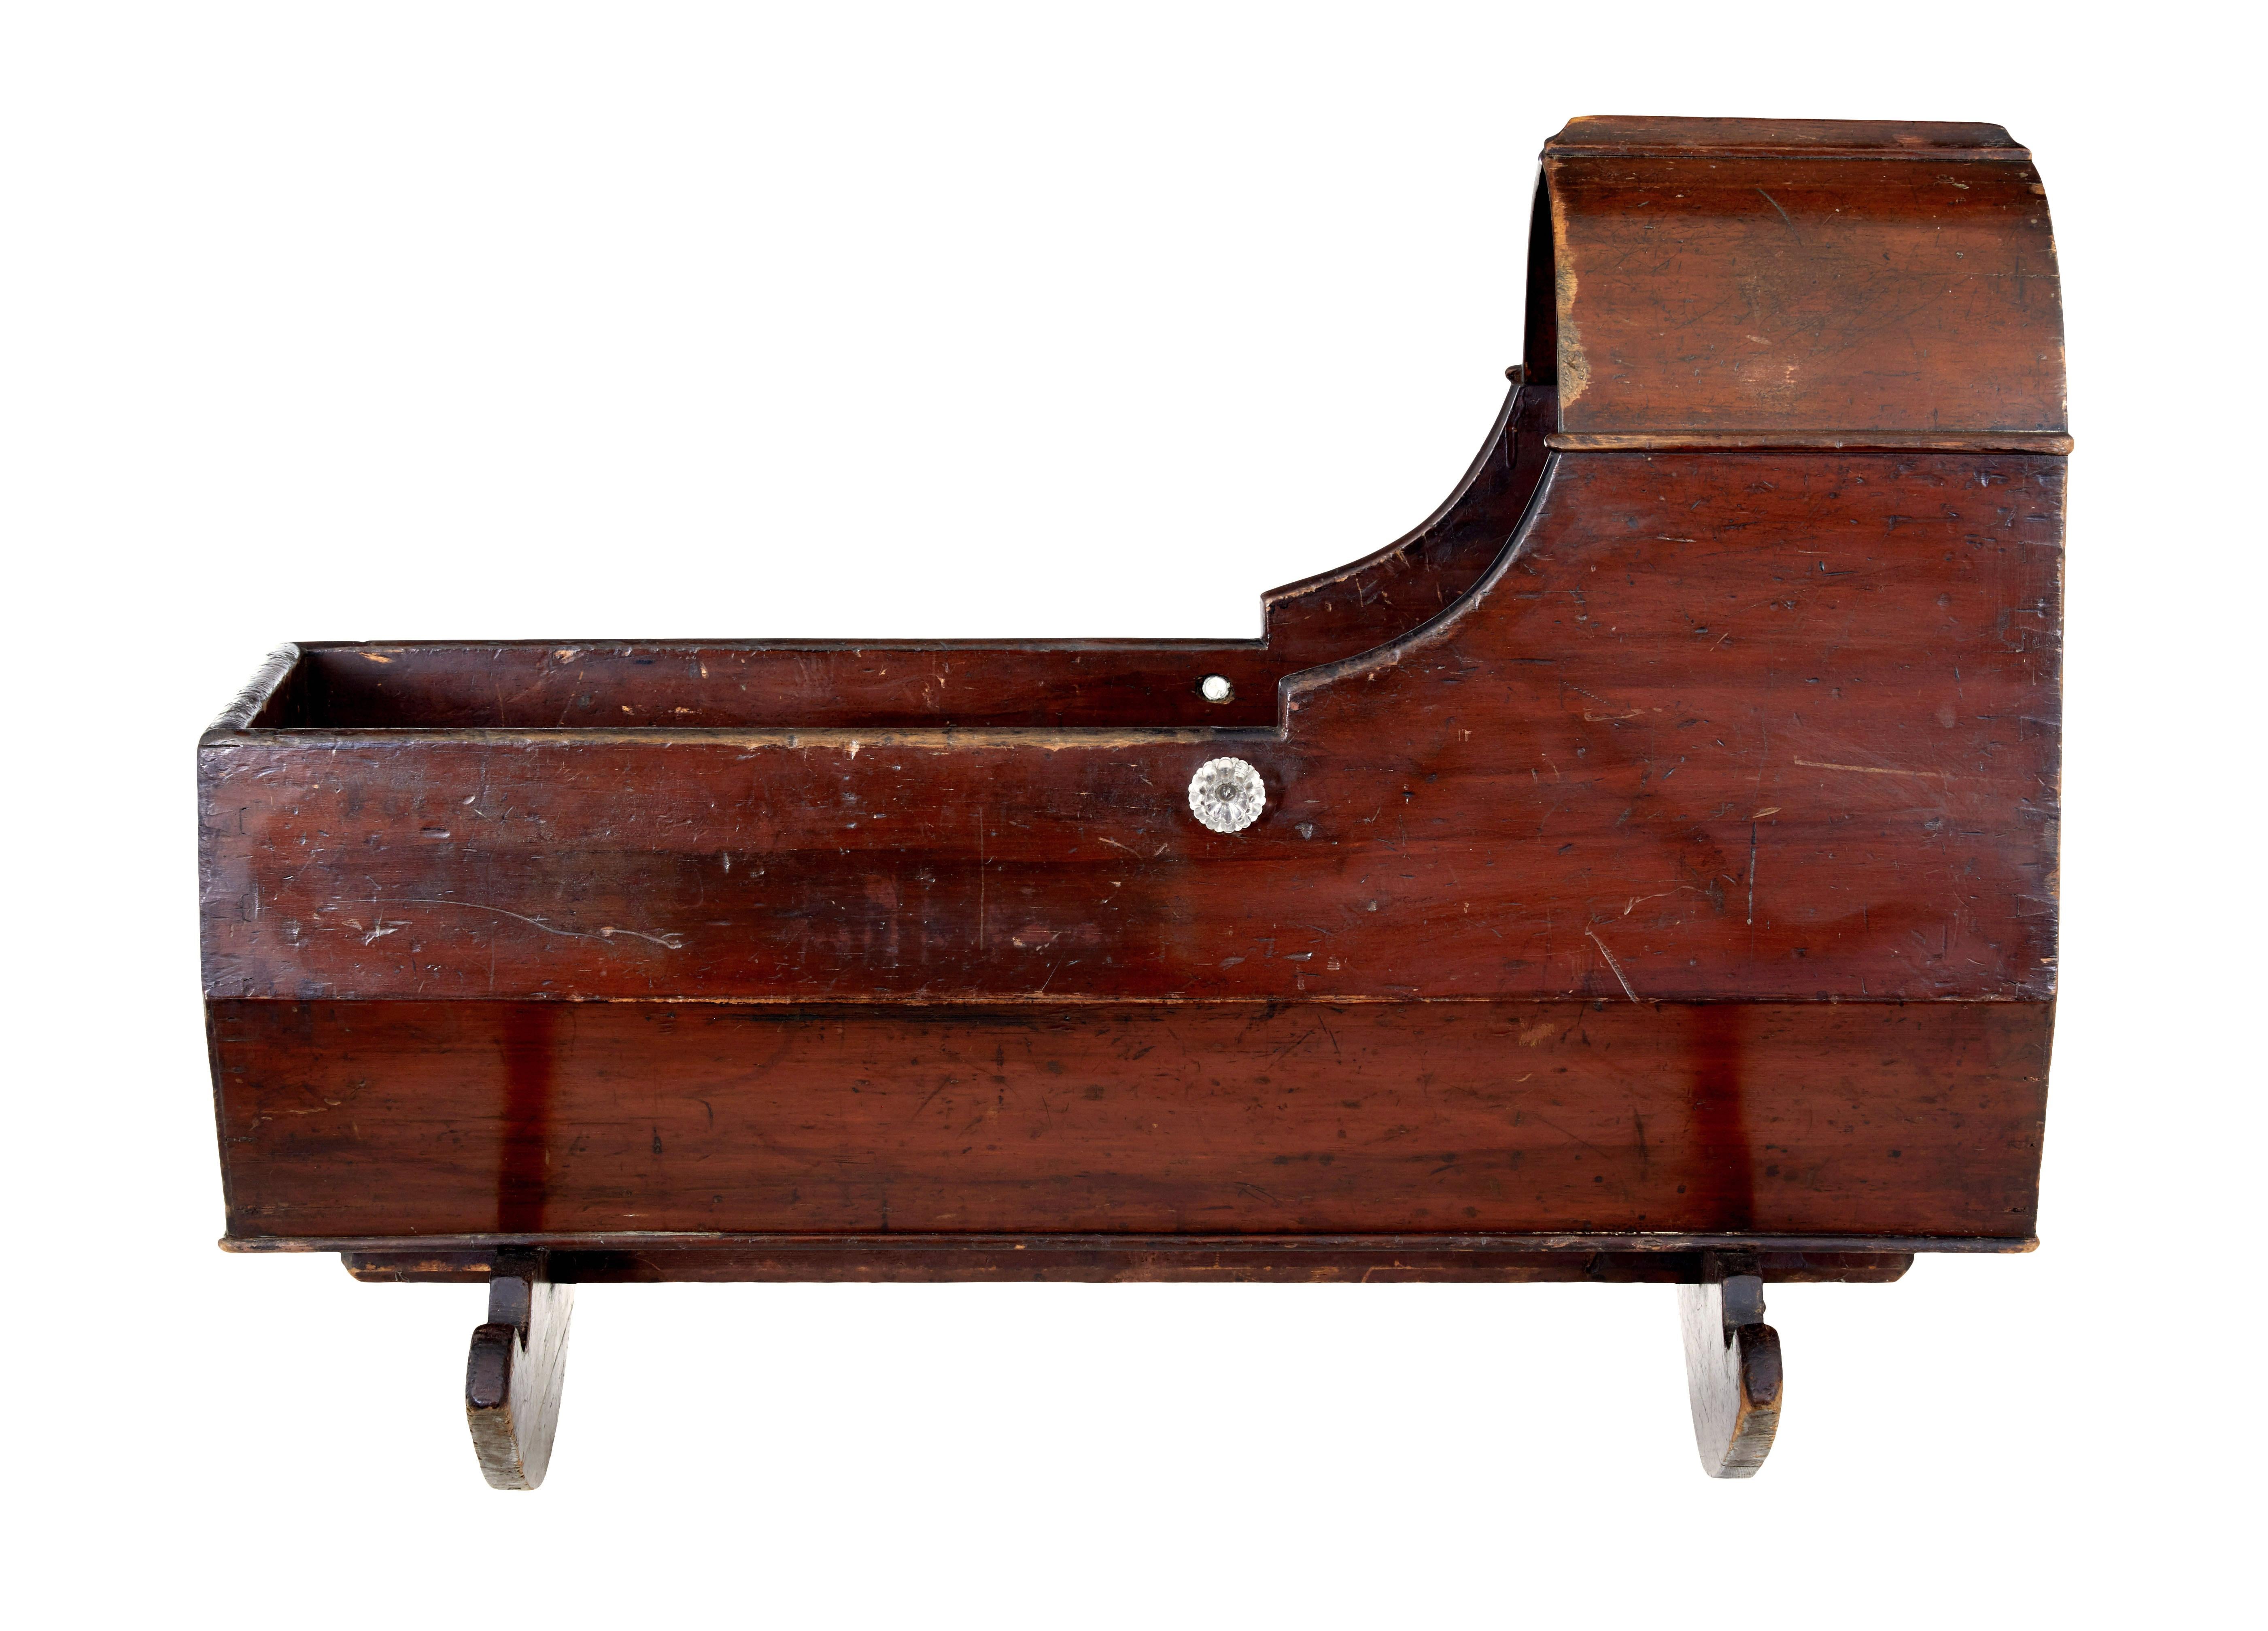 19th Century Victorian painted pine canopy top cradle For Sale